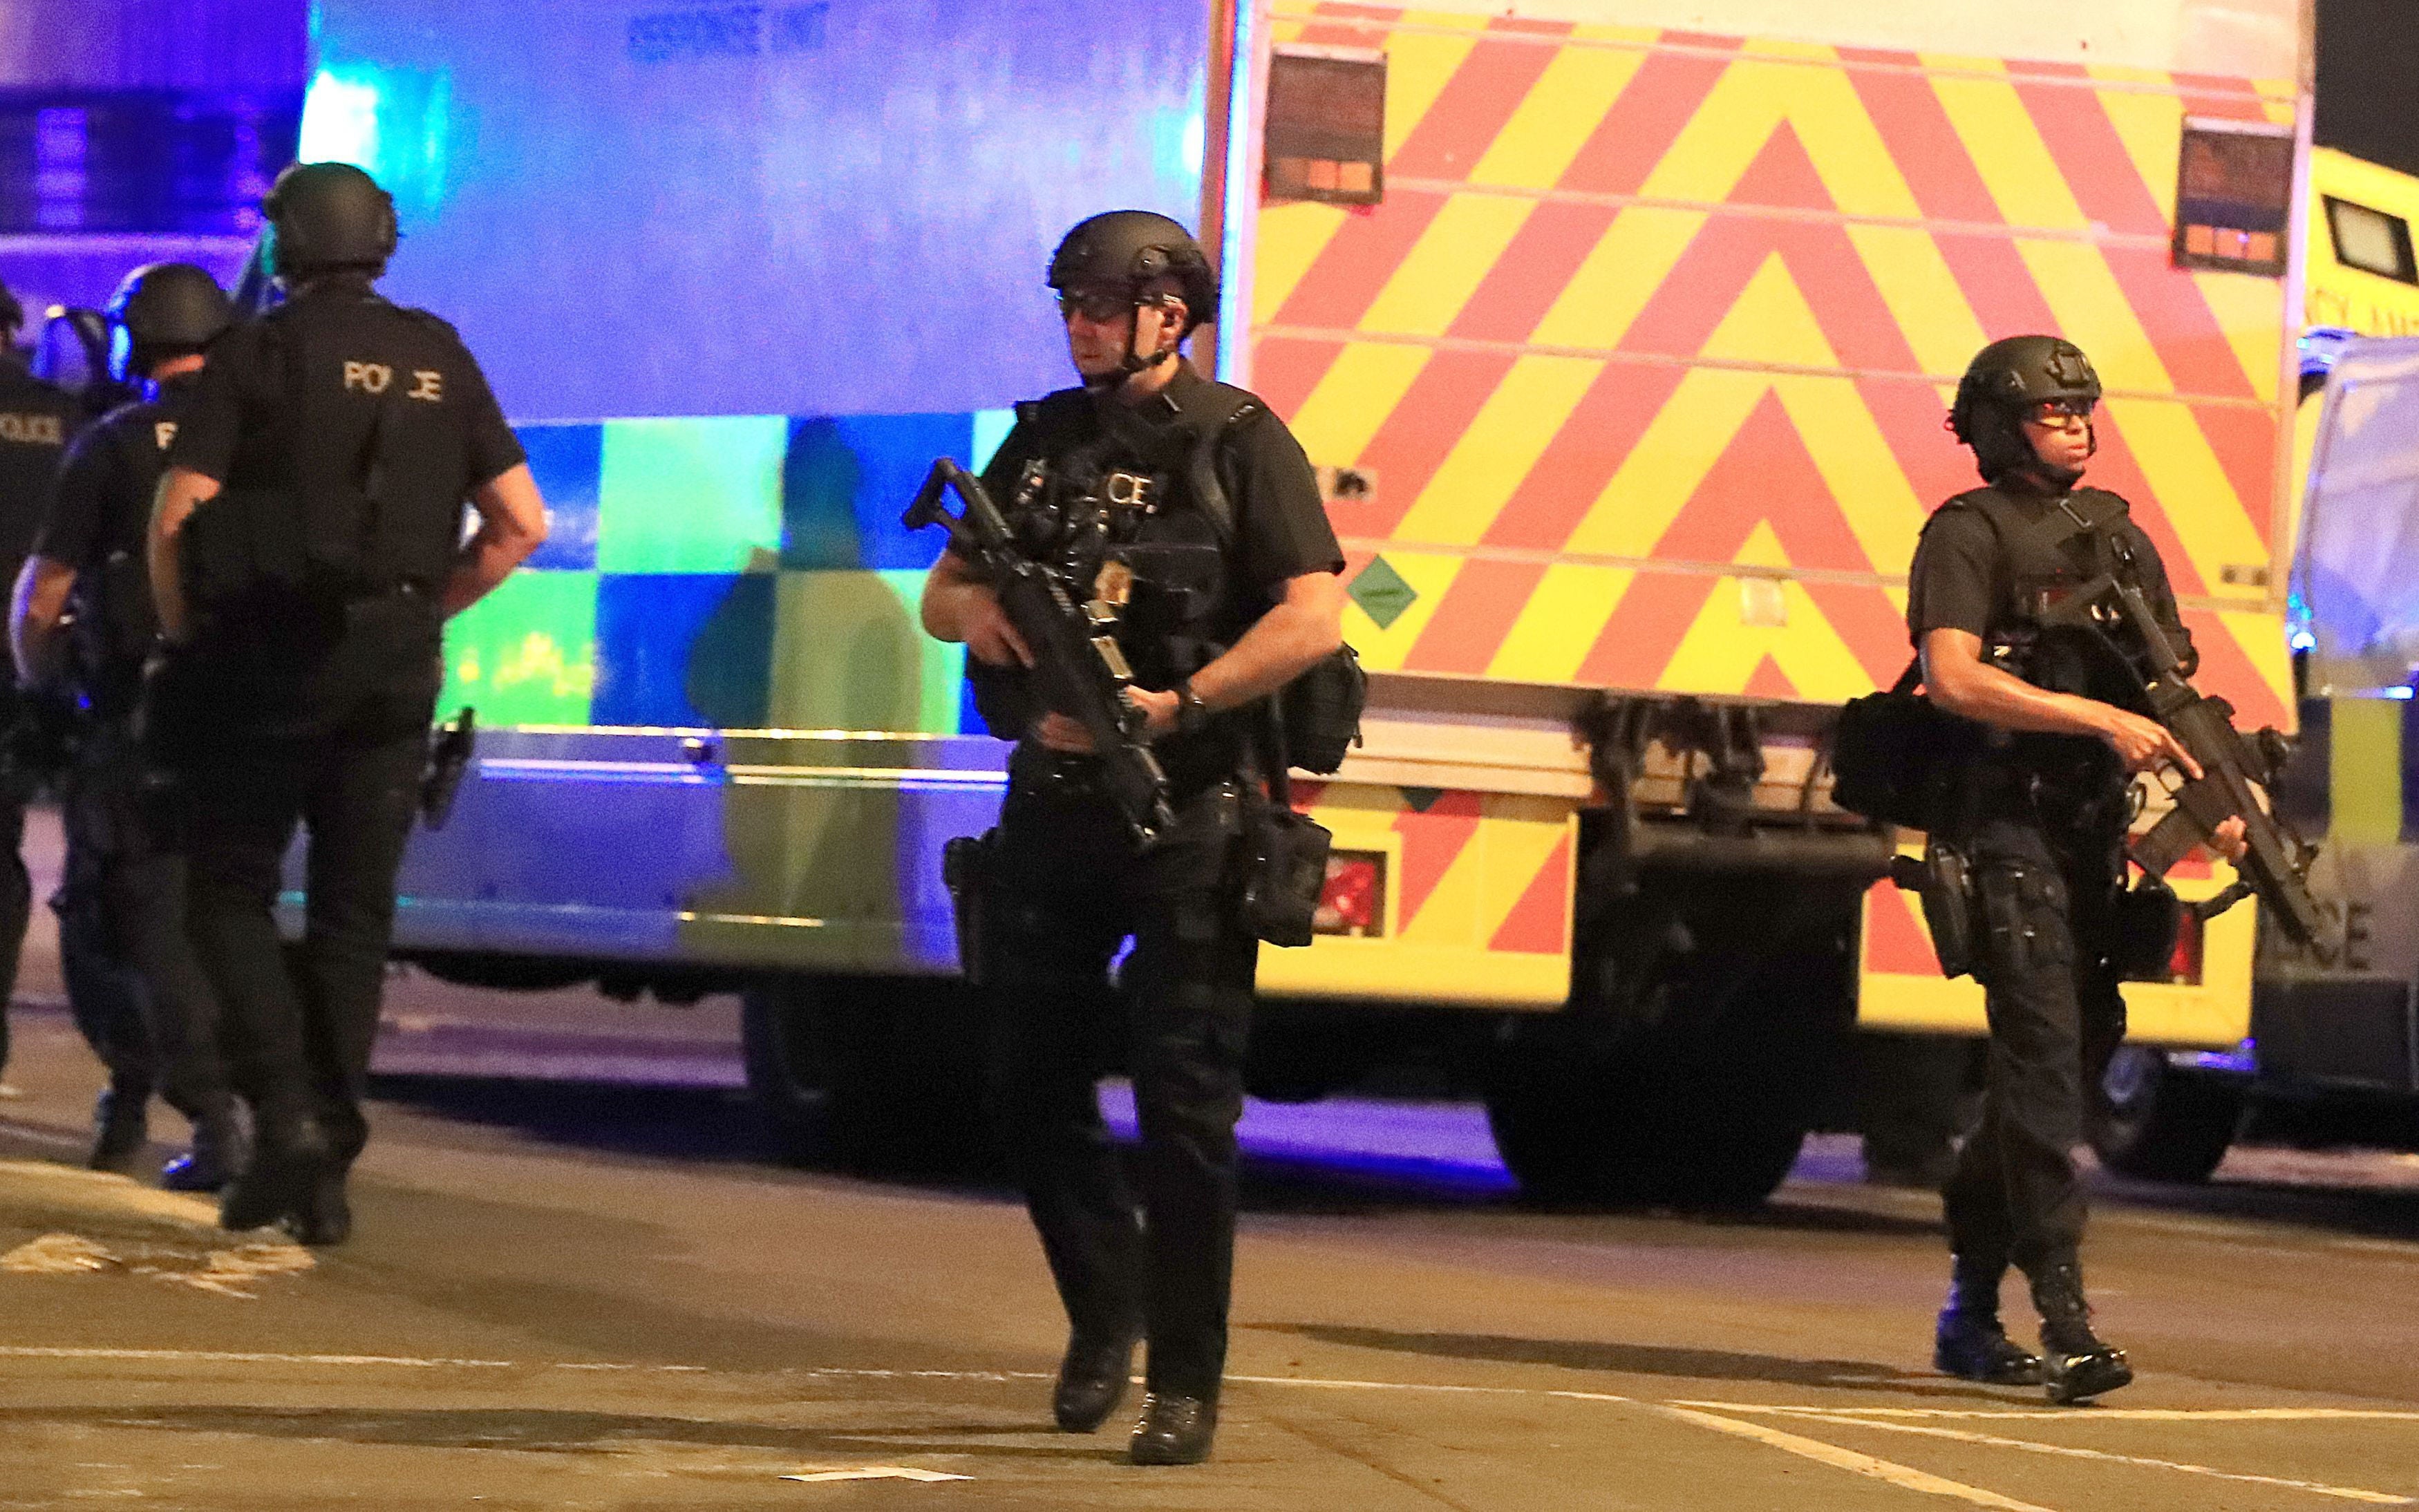 Armed police close to the Manchester Arena after the terror attack at an Ariana Grande concert